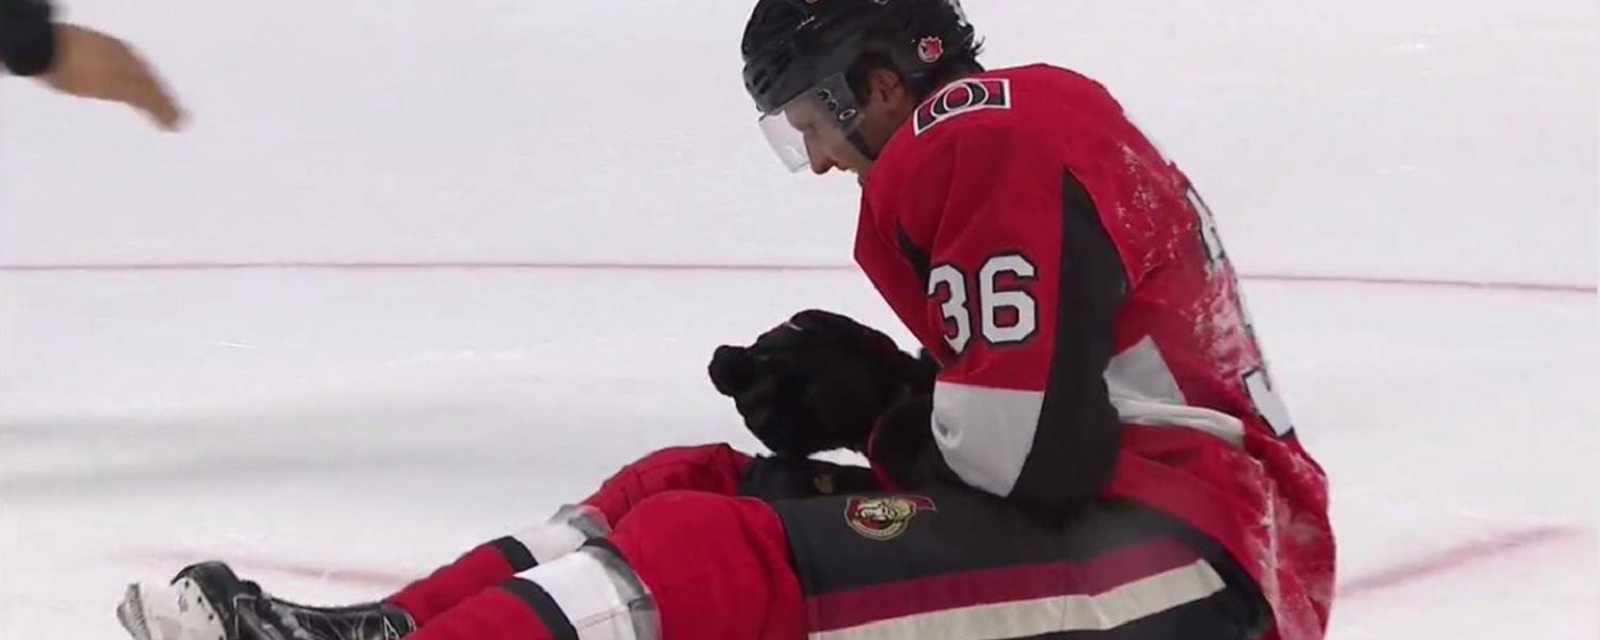 Breaking: Young Senators forward limps off the ice on Monday night.